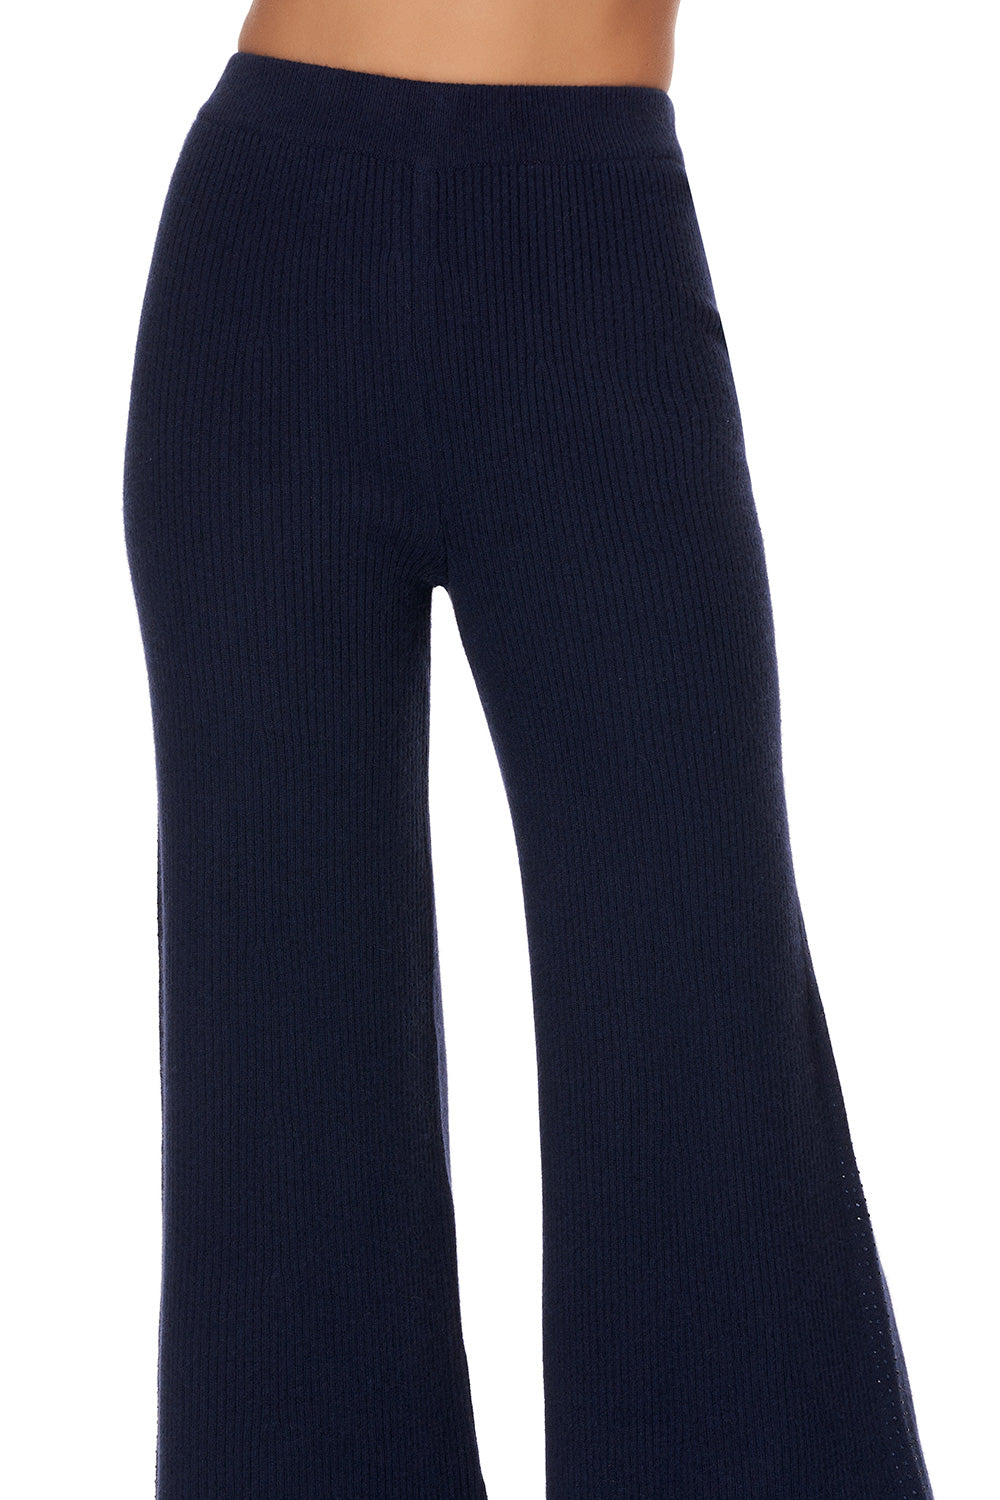 KNITTED PANT WITH SIDE DETAIL MARE MYSTIQUE